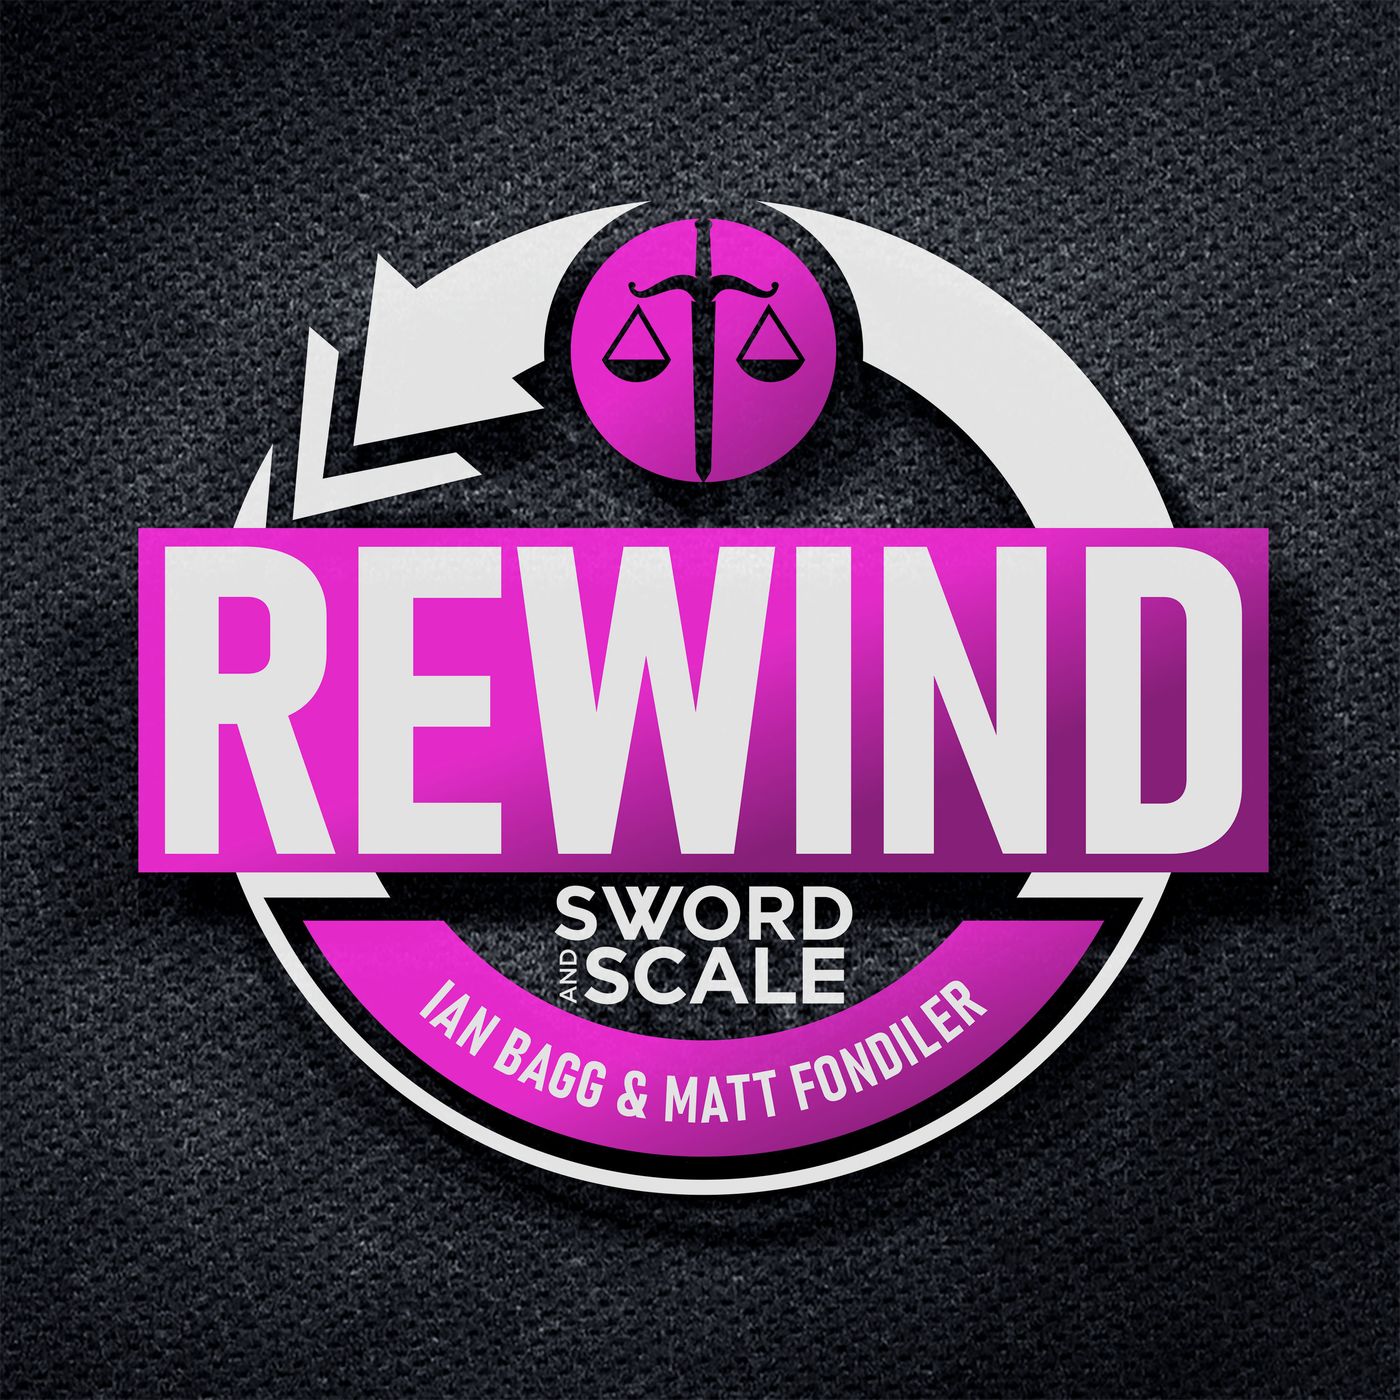 Sword and Scale Rewind:Sword and Scale